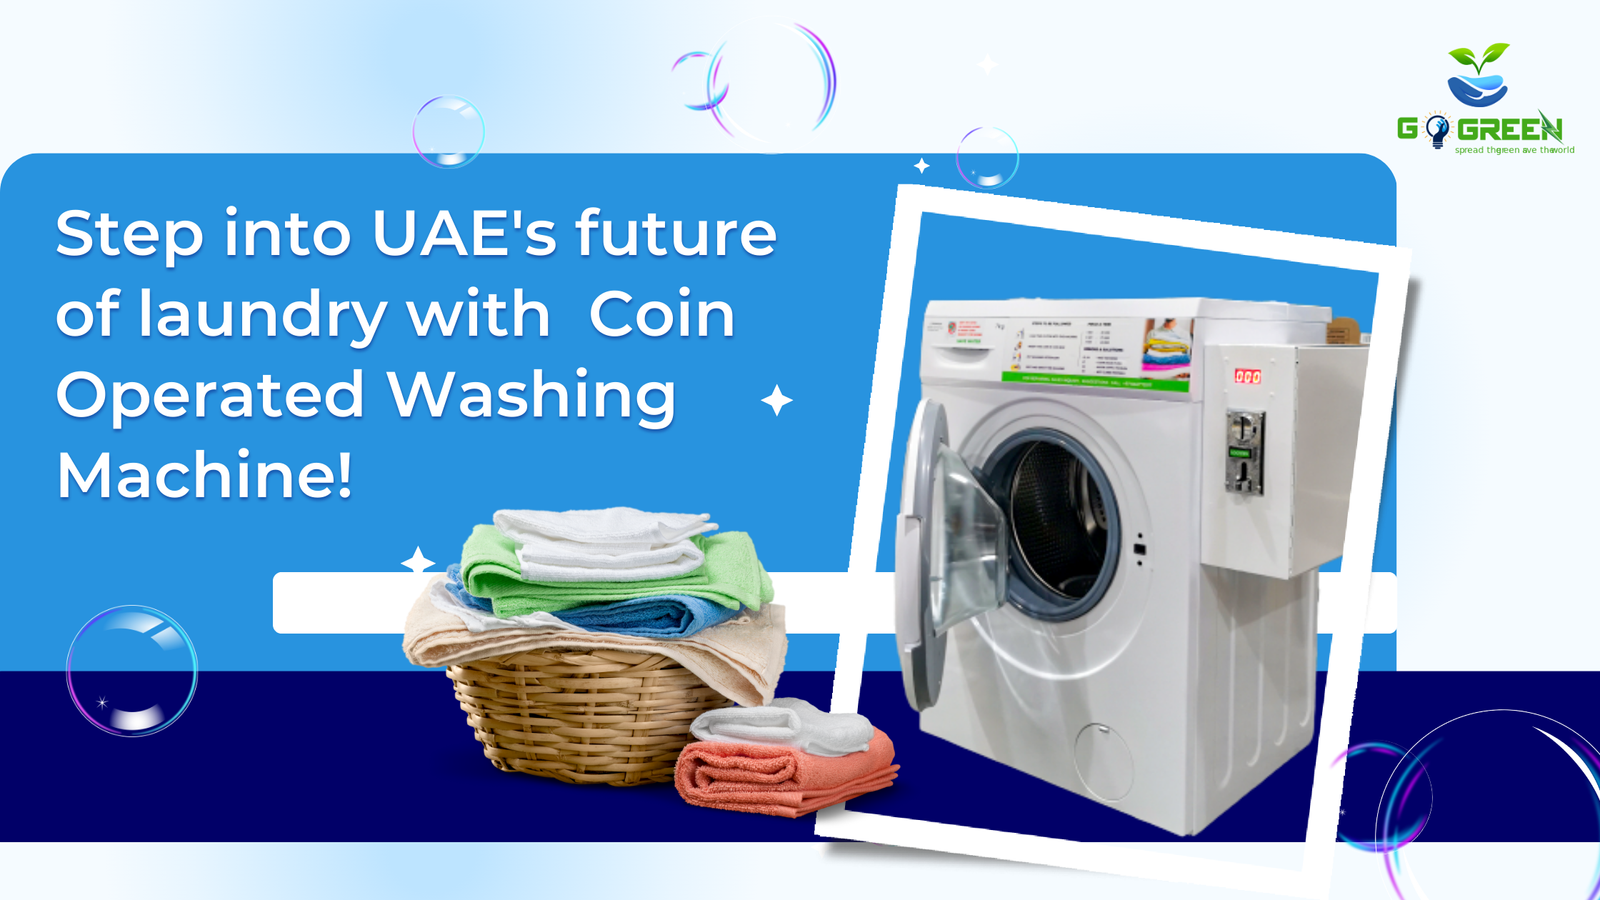 Hygiene Matters: Maintaining Clean and Germ-Free Laundry with Coin-Operated Liquid Detergent Dispensers